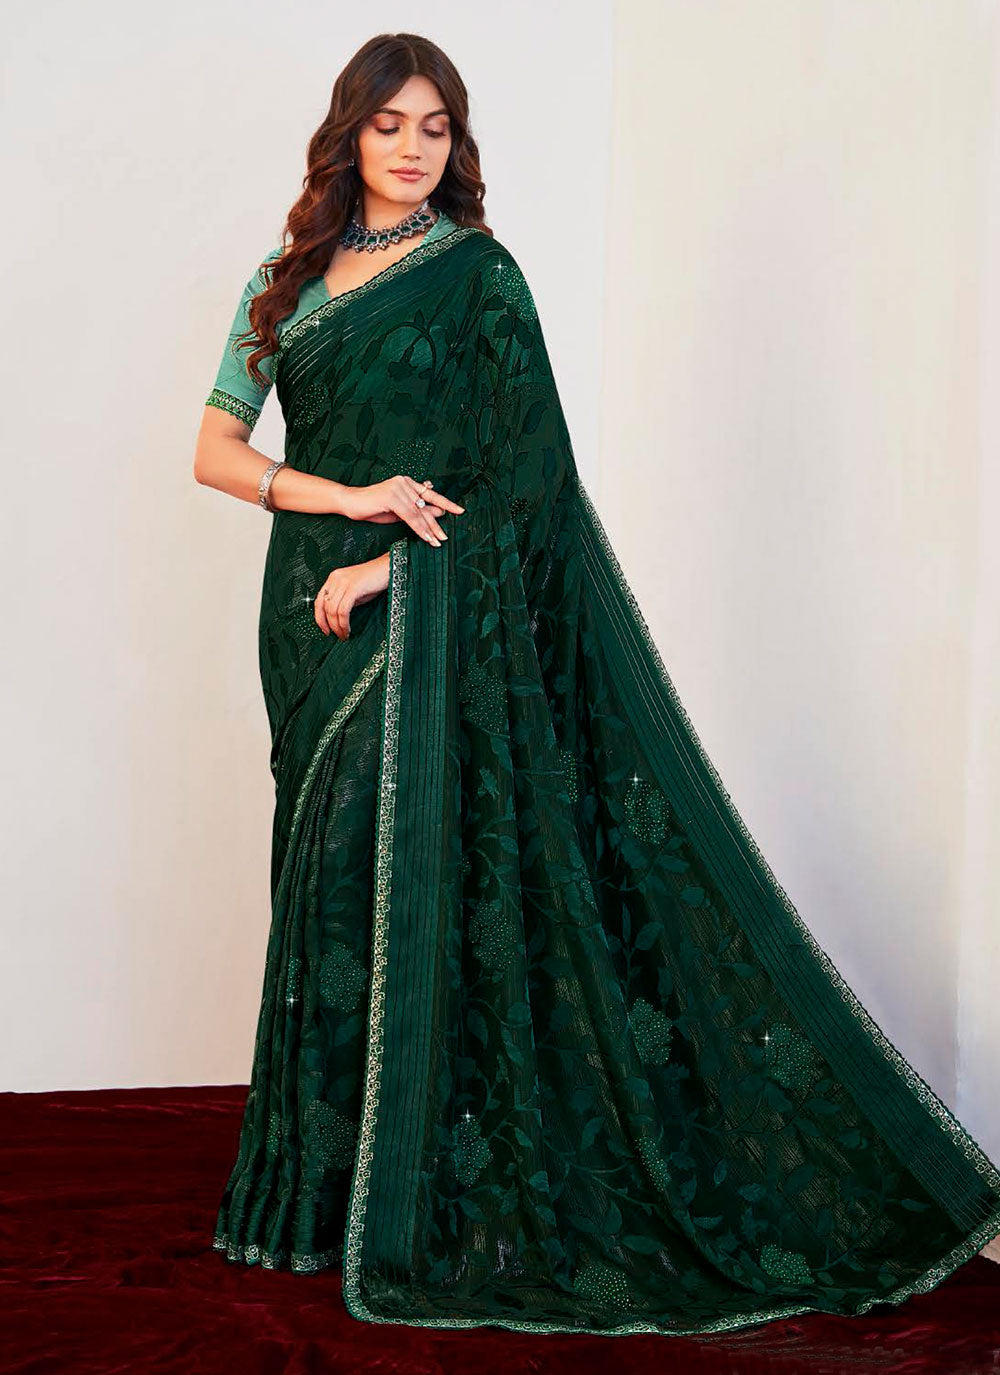 Green Brasso Contemporary Sari With Fancy And Lace Work For Ceremonial